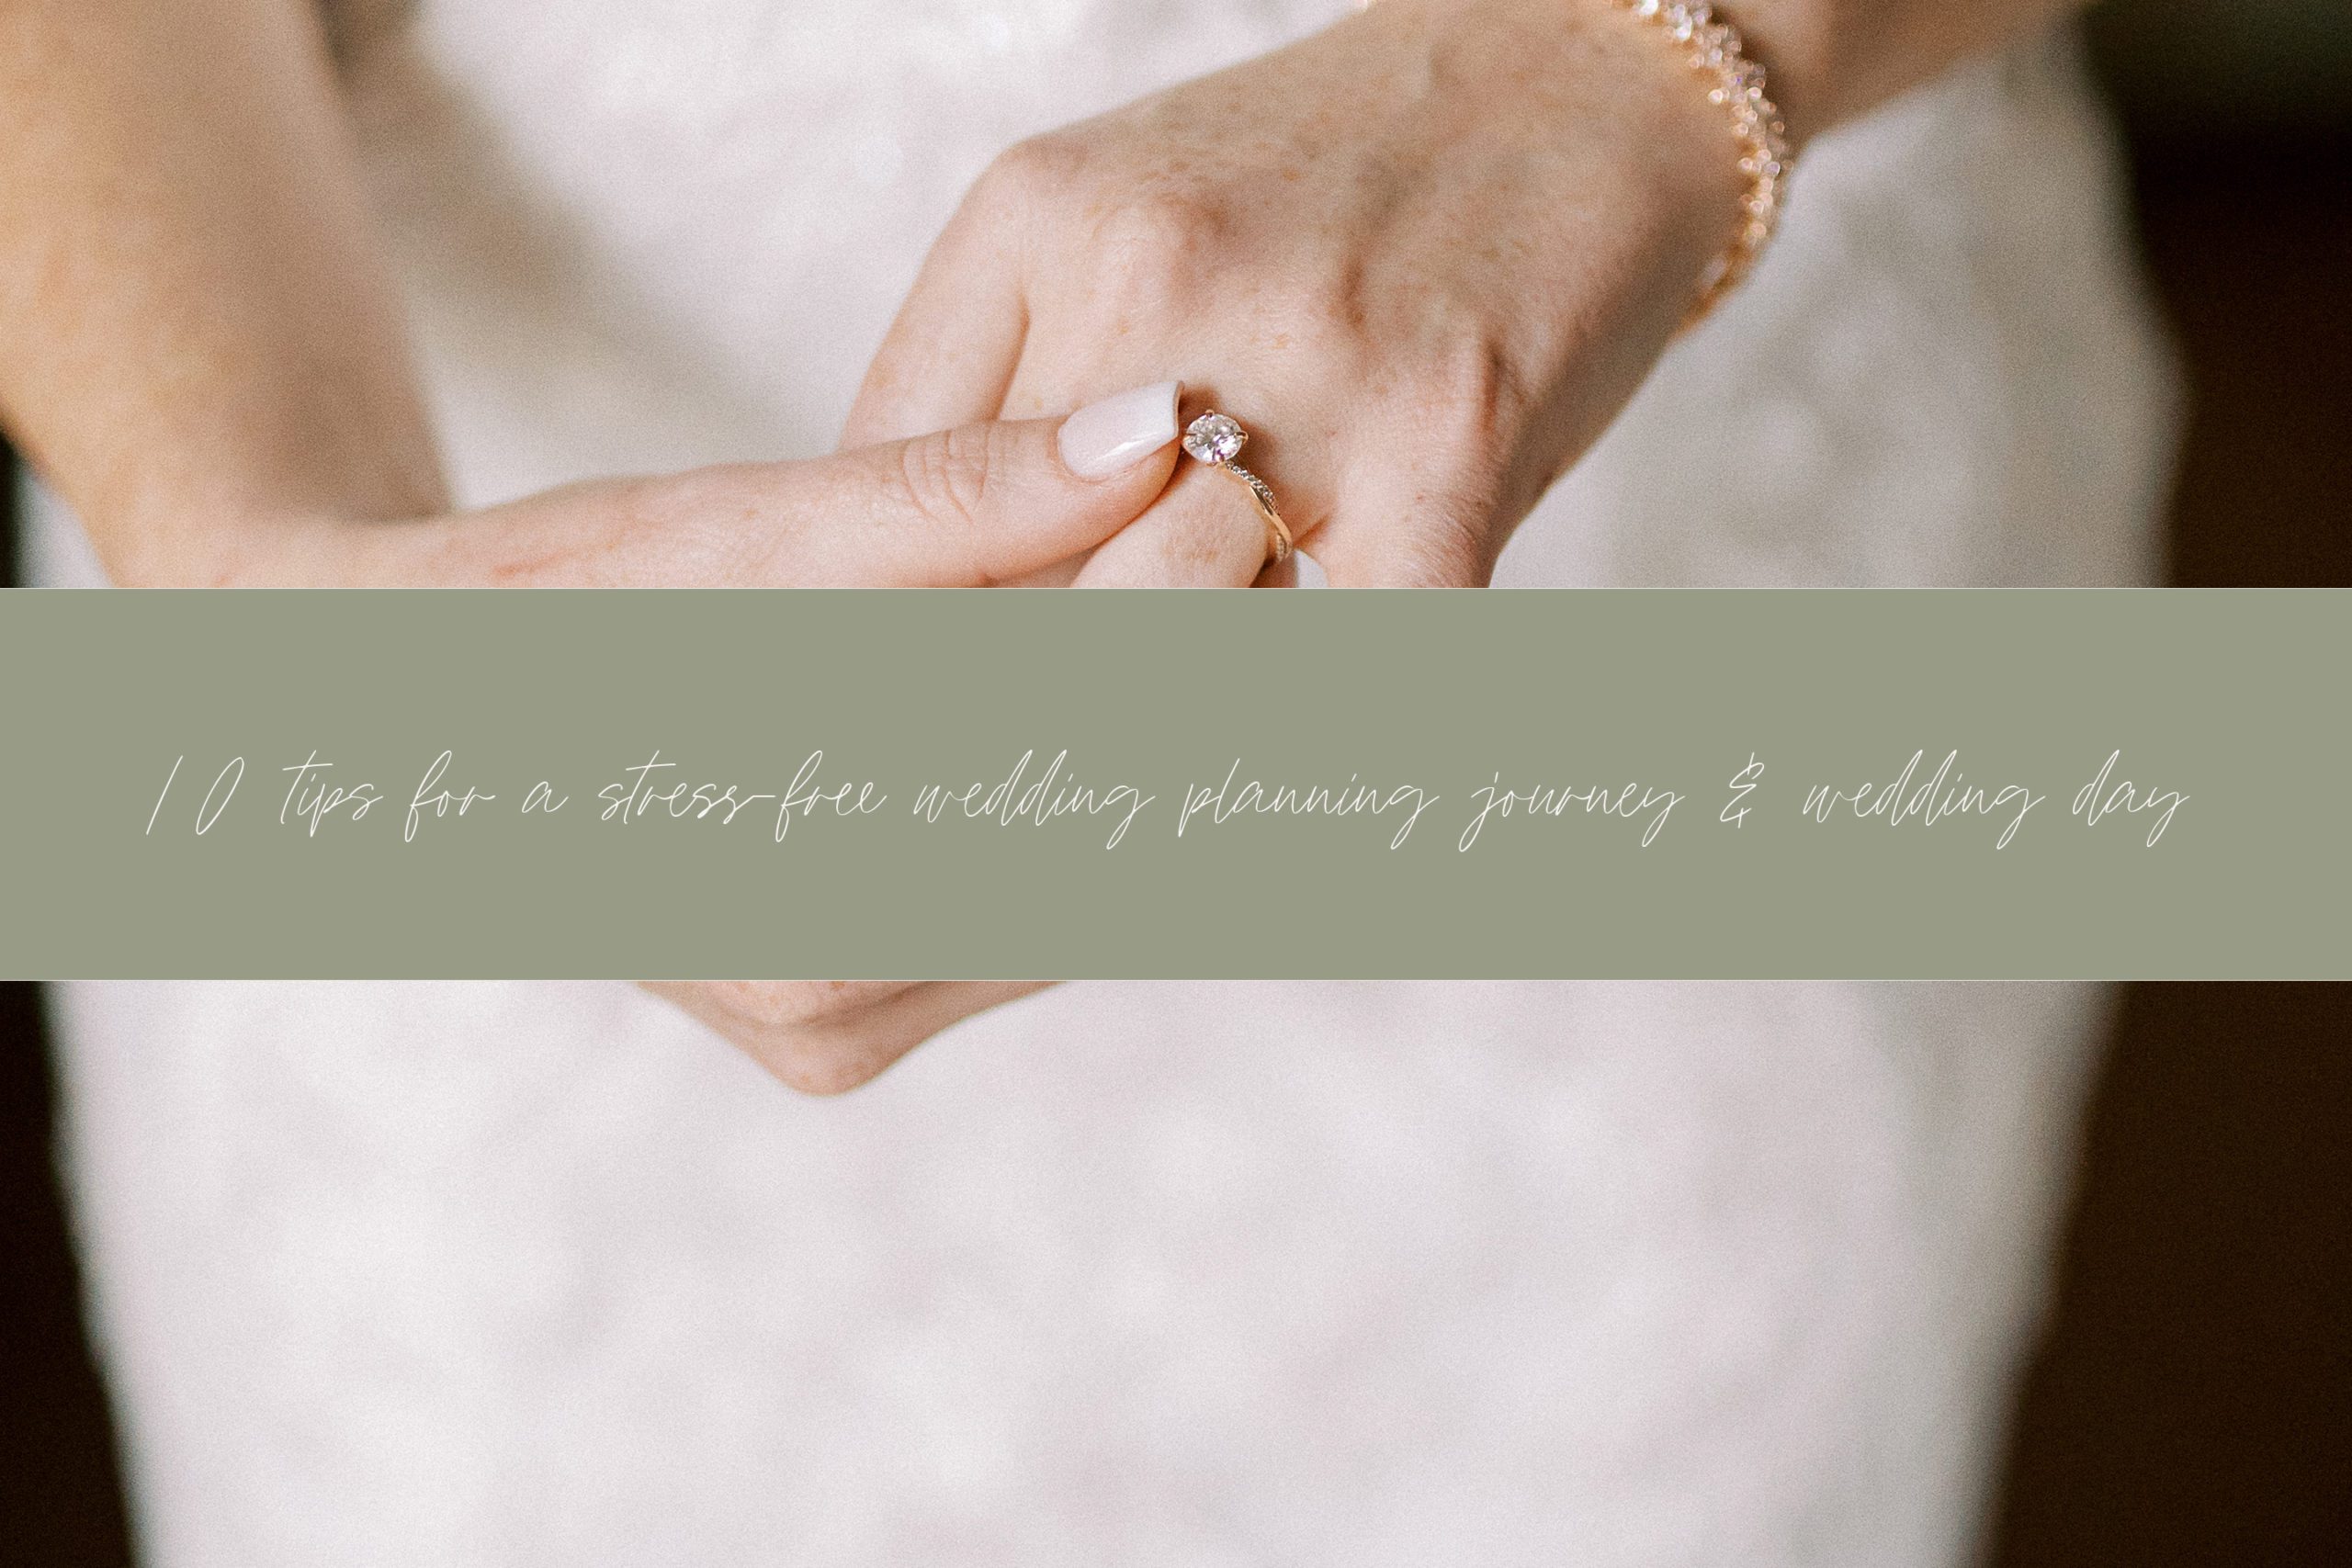 10 Tips for a Stress-Free Wedding Planning Journey & Wedding Day